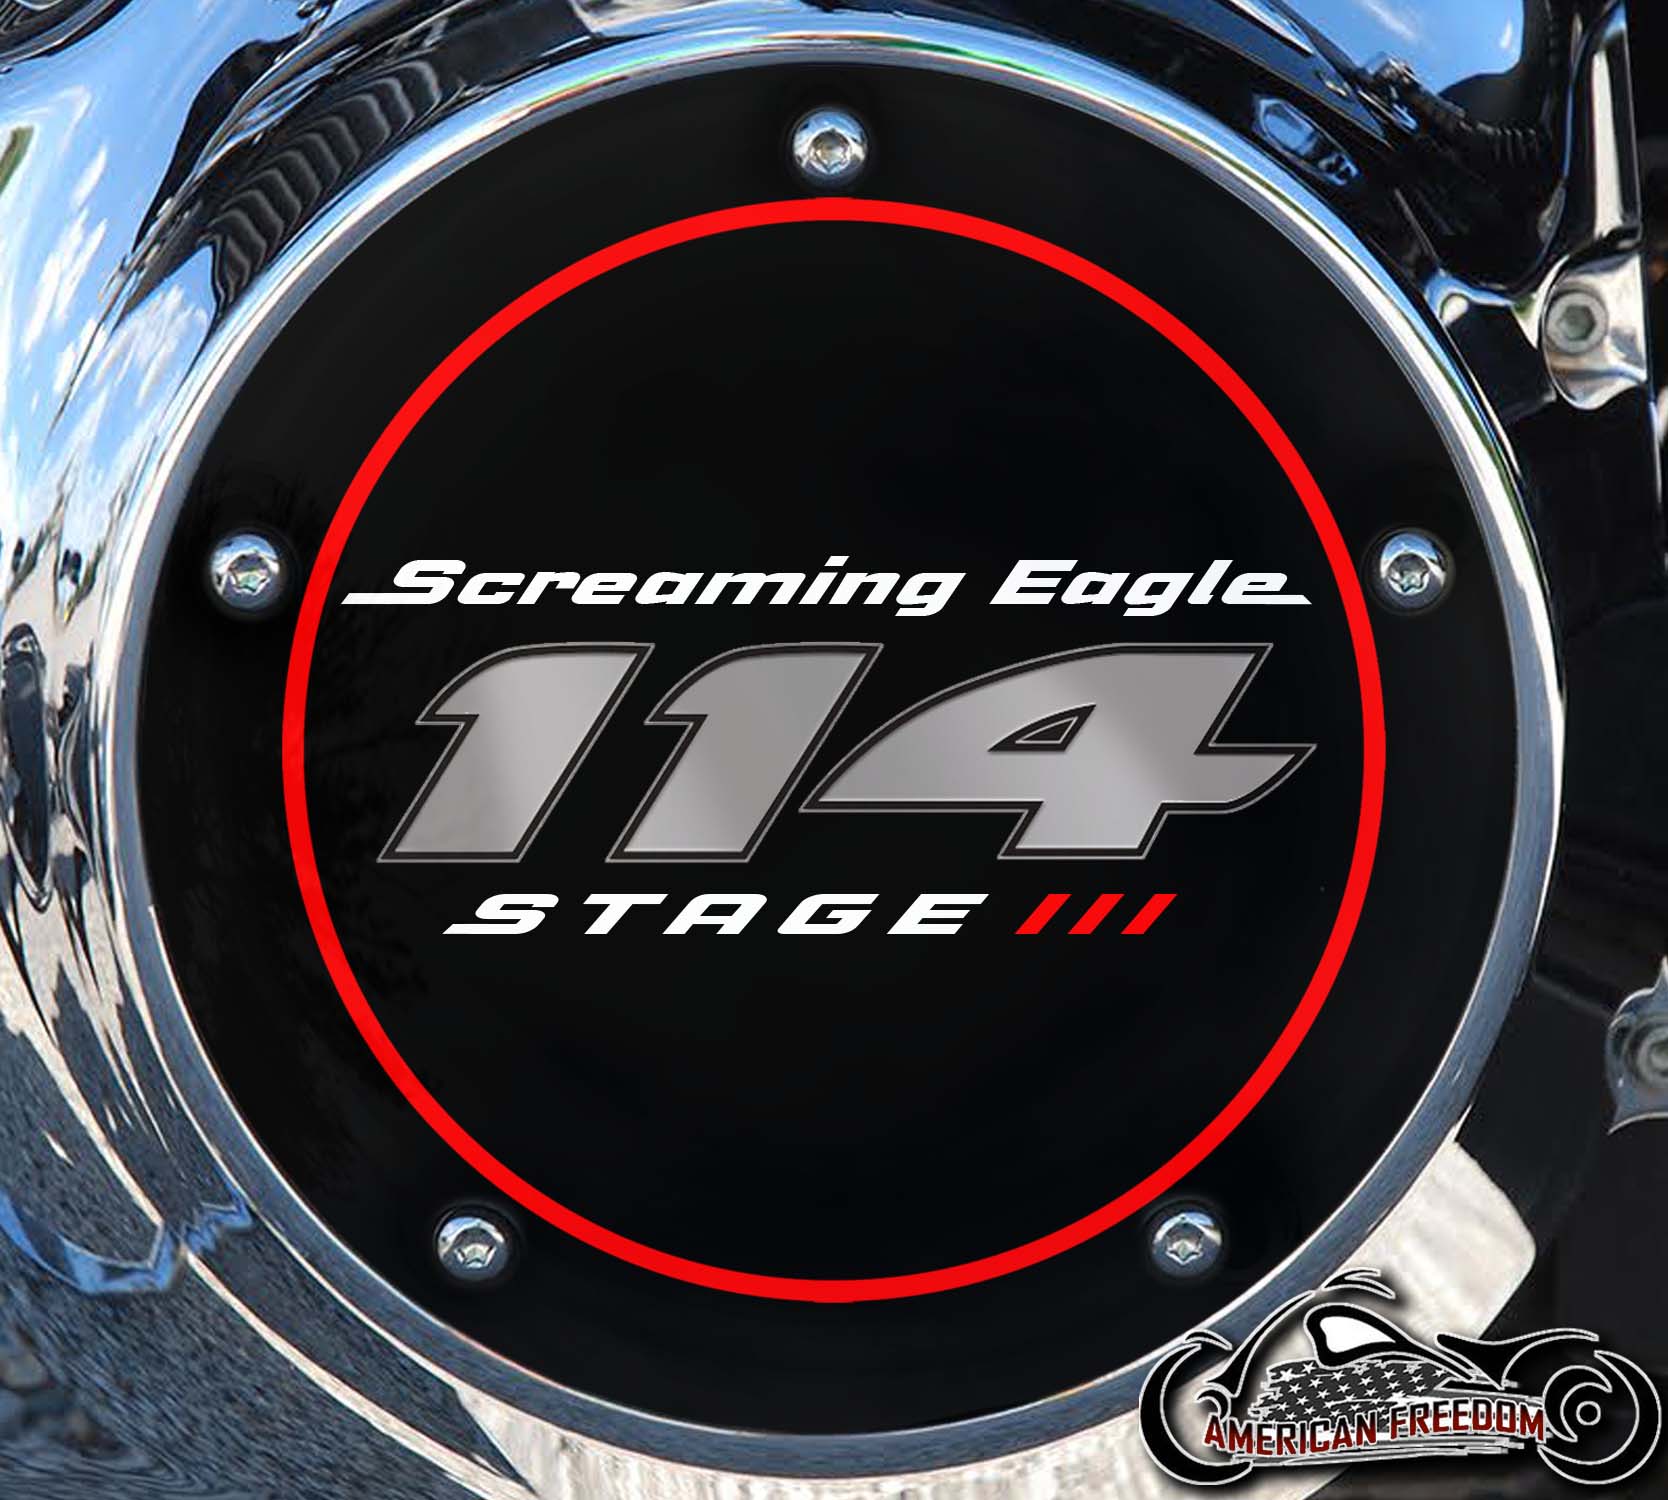 Screaming Eagle Stage III 114 DERBY COVER OL